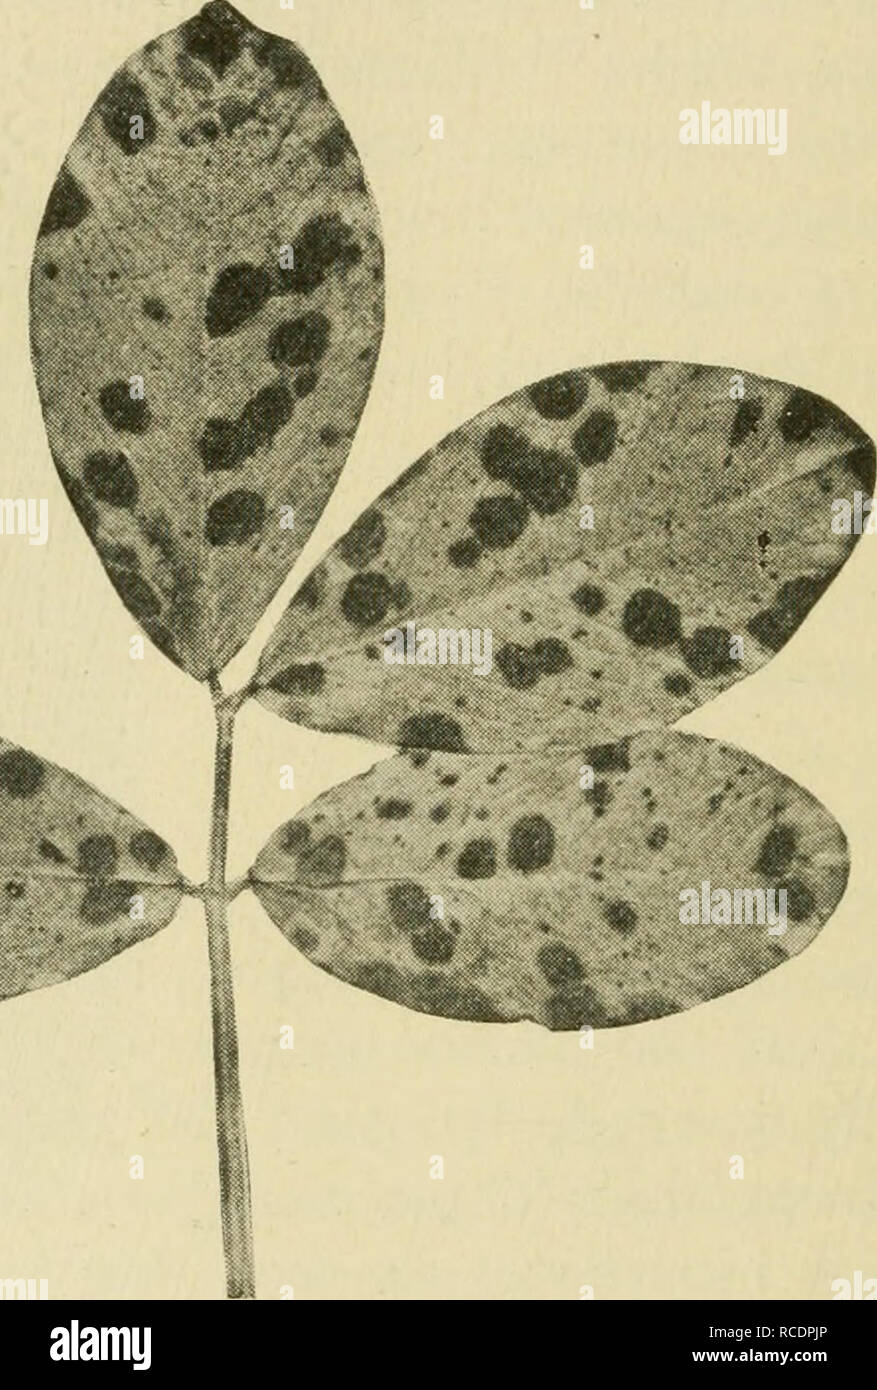 . Diseases of economic plants. Plant diseases. 214 Diseases of Economic Plants PEANUT Leaf-spot (Cercospora personata (B. &amp; C.) Ell.).—This leaf-spot is circular in outline, indefinitely bordered, black to brown in the center and grading to green on its outer edge. The lower leaves are first affected and suffer most; later the disease spreads to the upper leaves. The leaves. Fig. 116. — Peanut leaf-spot. After Wolf. begin to fall soon after they spot, and in many cases the death of the plant results. It is often a pest. The causal fungus was first collected in Carolina and Alabama by Raven Stock Photo